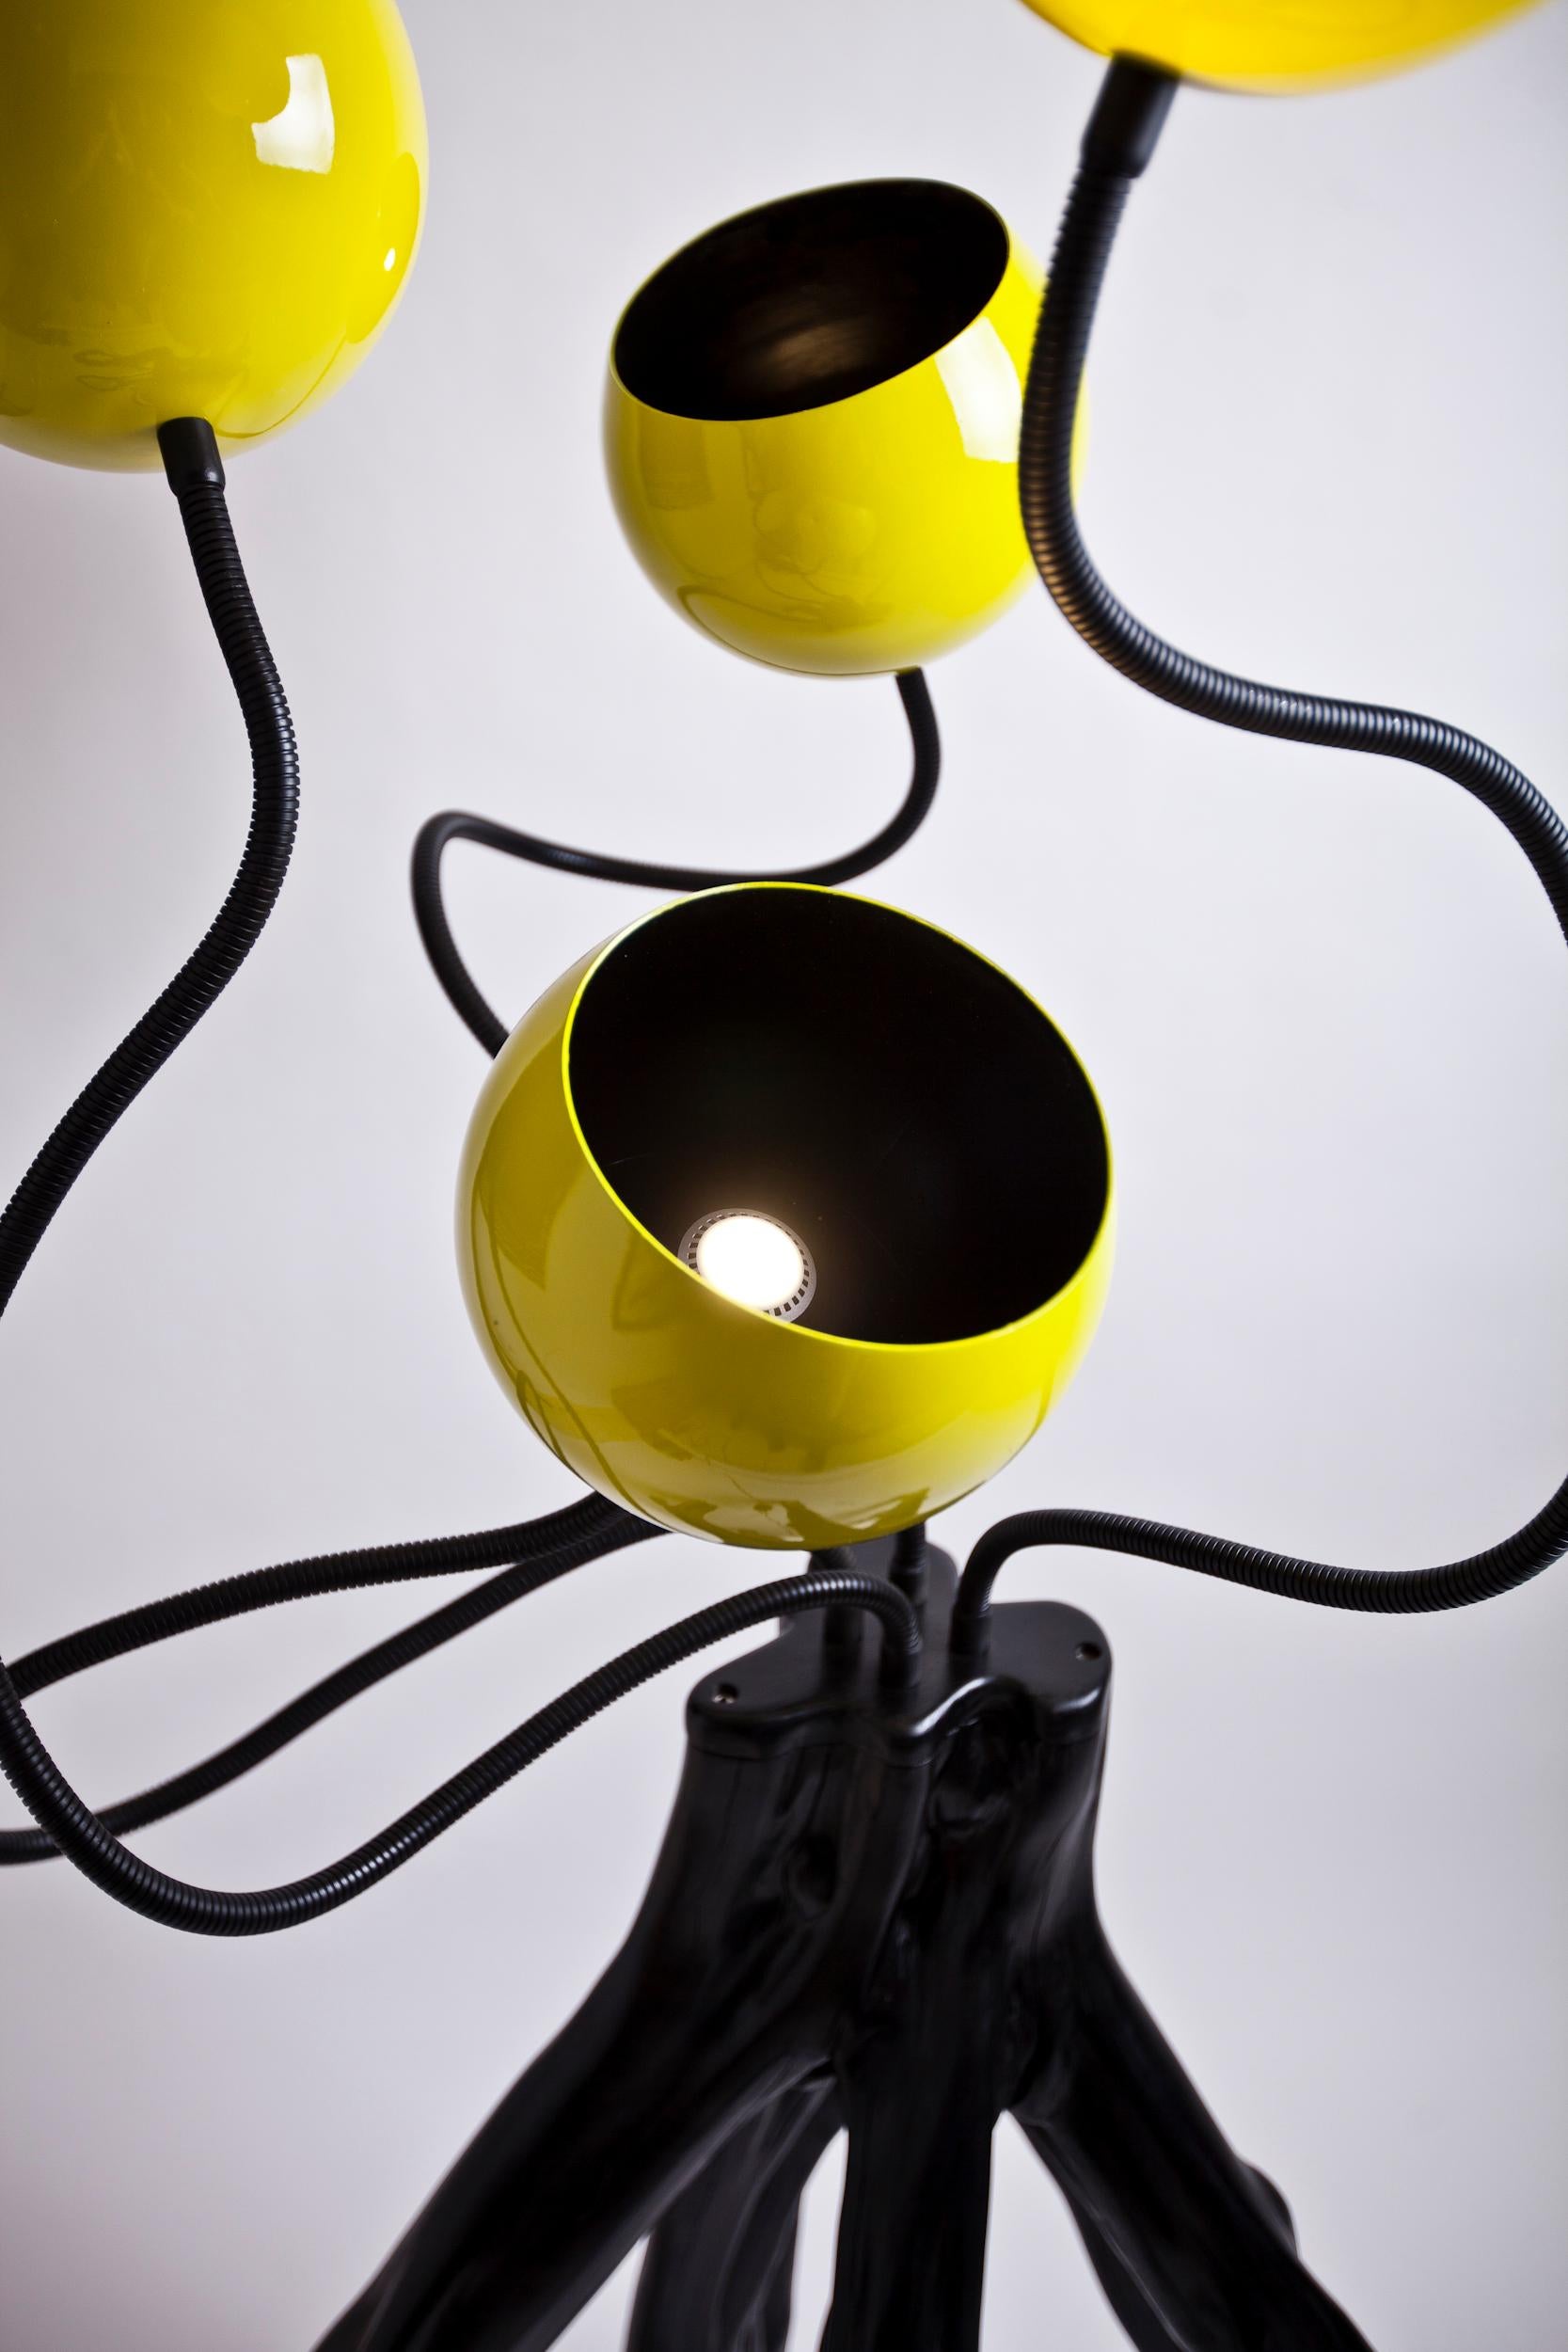 Unique Xango floor lamp by Gustavo Dias
Xangô lamp
Ebonized wood
Steel flexibles
Aluminum globes
Measures: L 1.0 m x W 0.80 m x H 1.60 m

Gustavo Dias
One the most important contemporary Brazilian designer.
Born in 1978 and raised in a